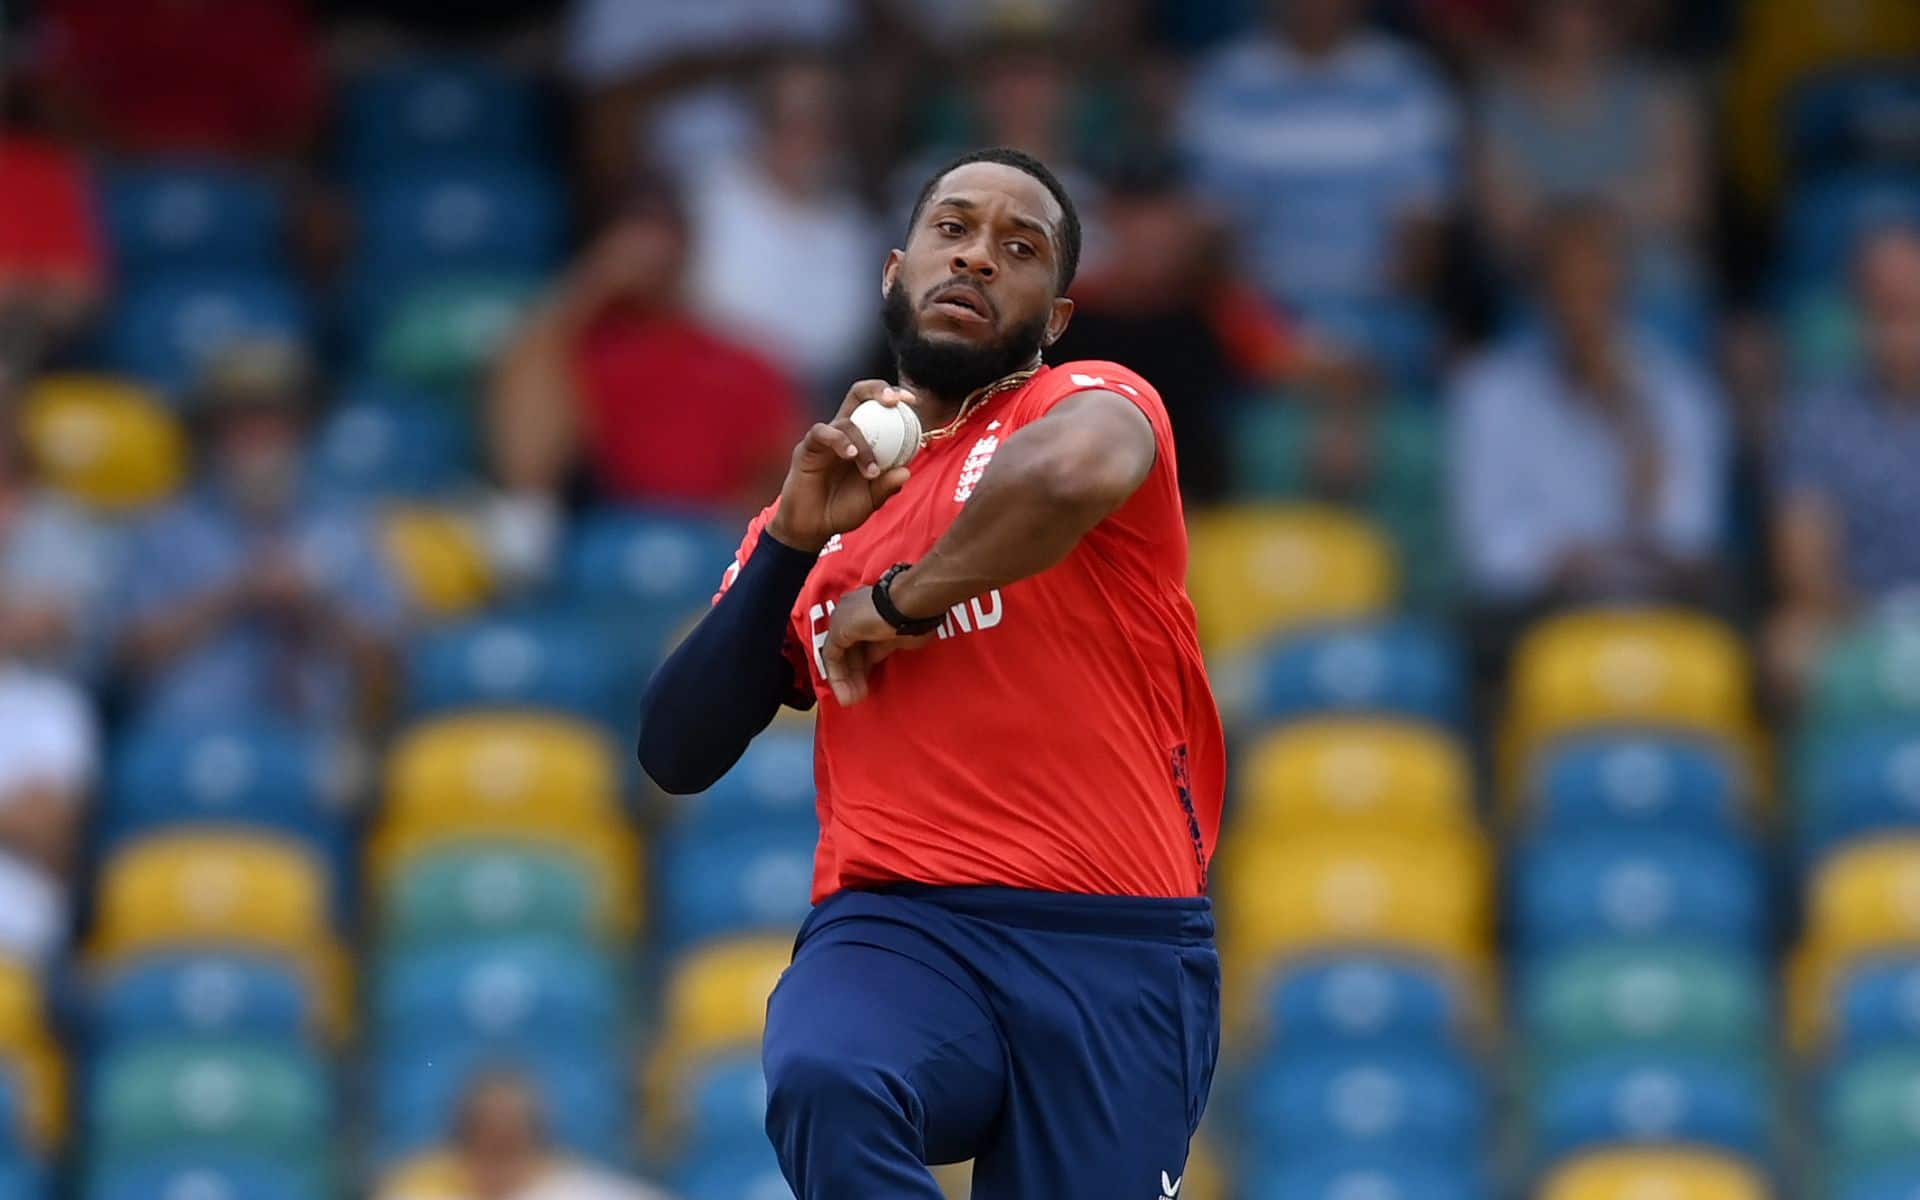 Chris Jordan completed his 100th wicket (x)